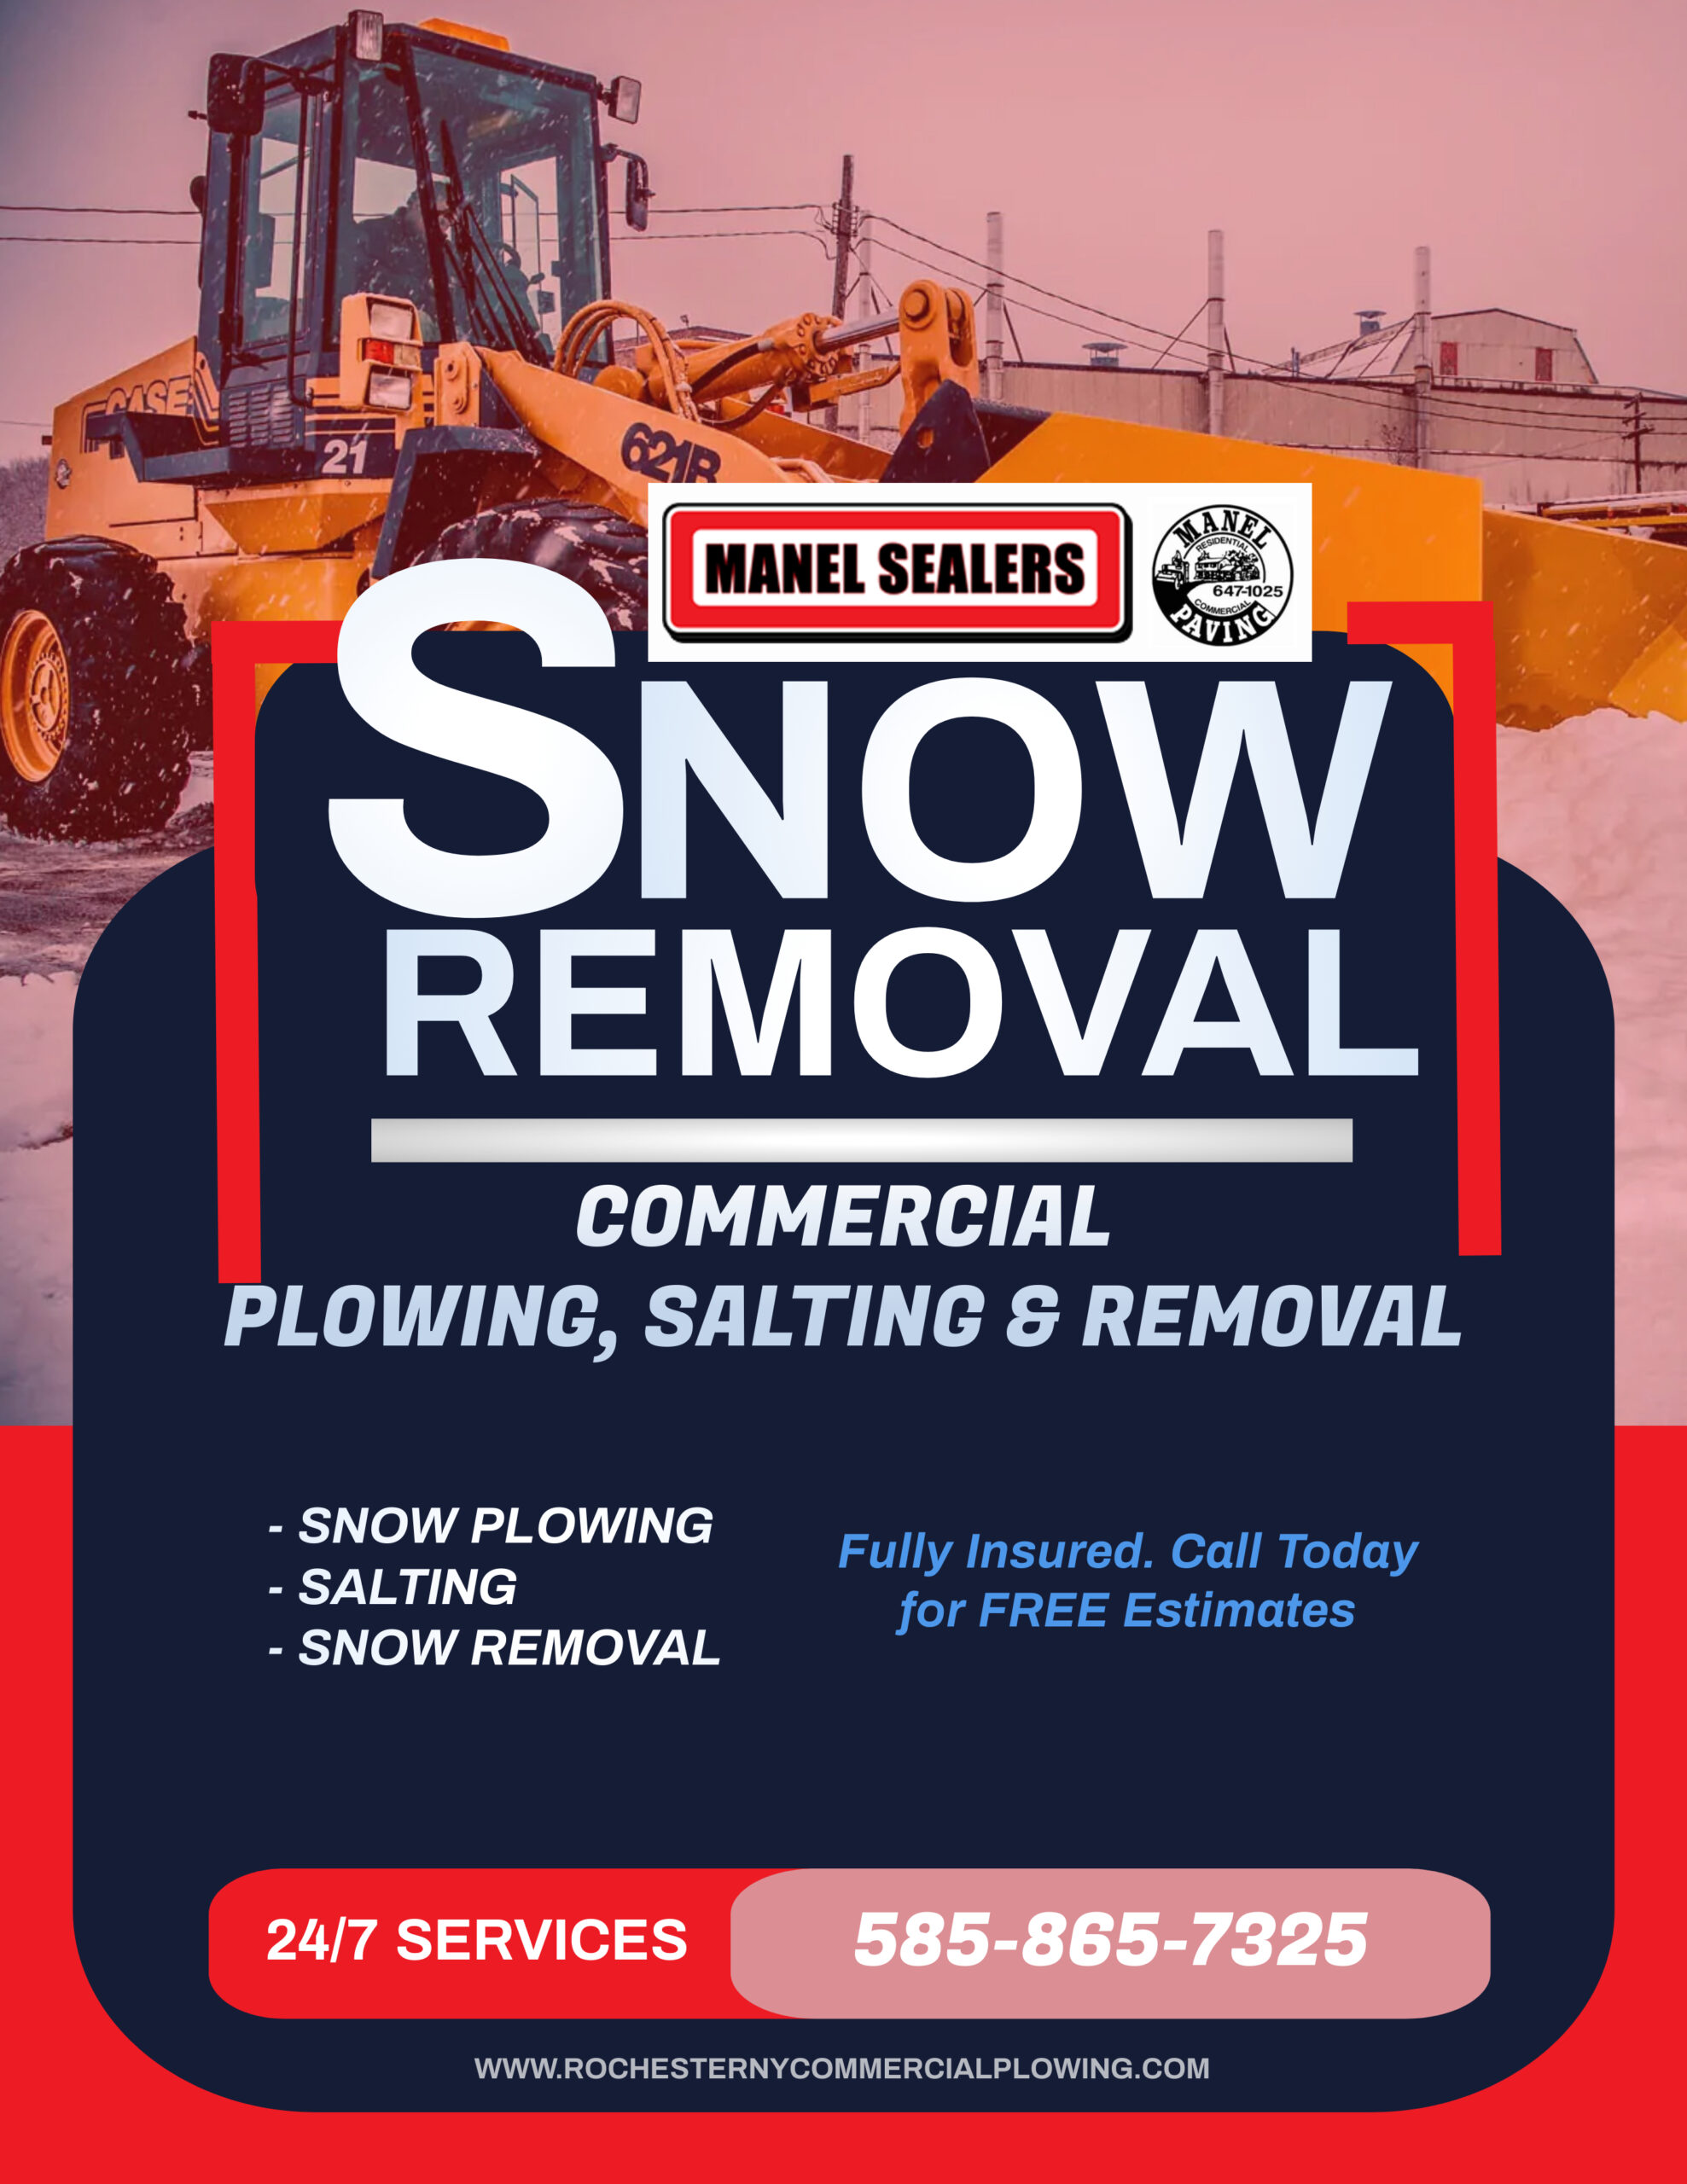 Commercial Snow Plowing and Removal – Manel Sealers